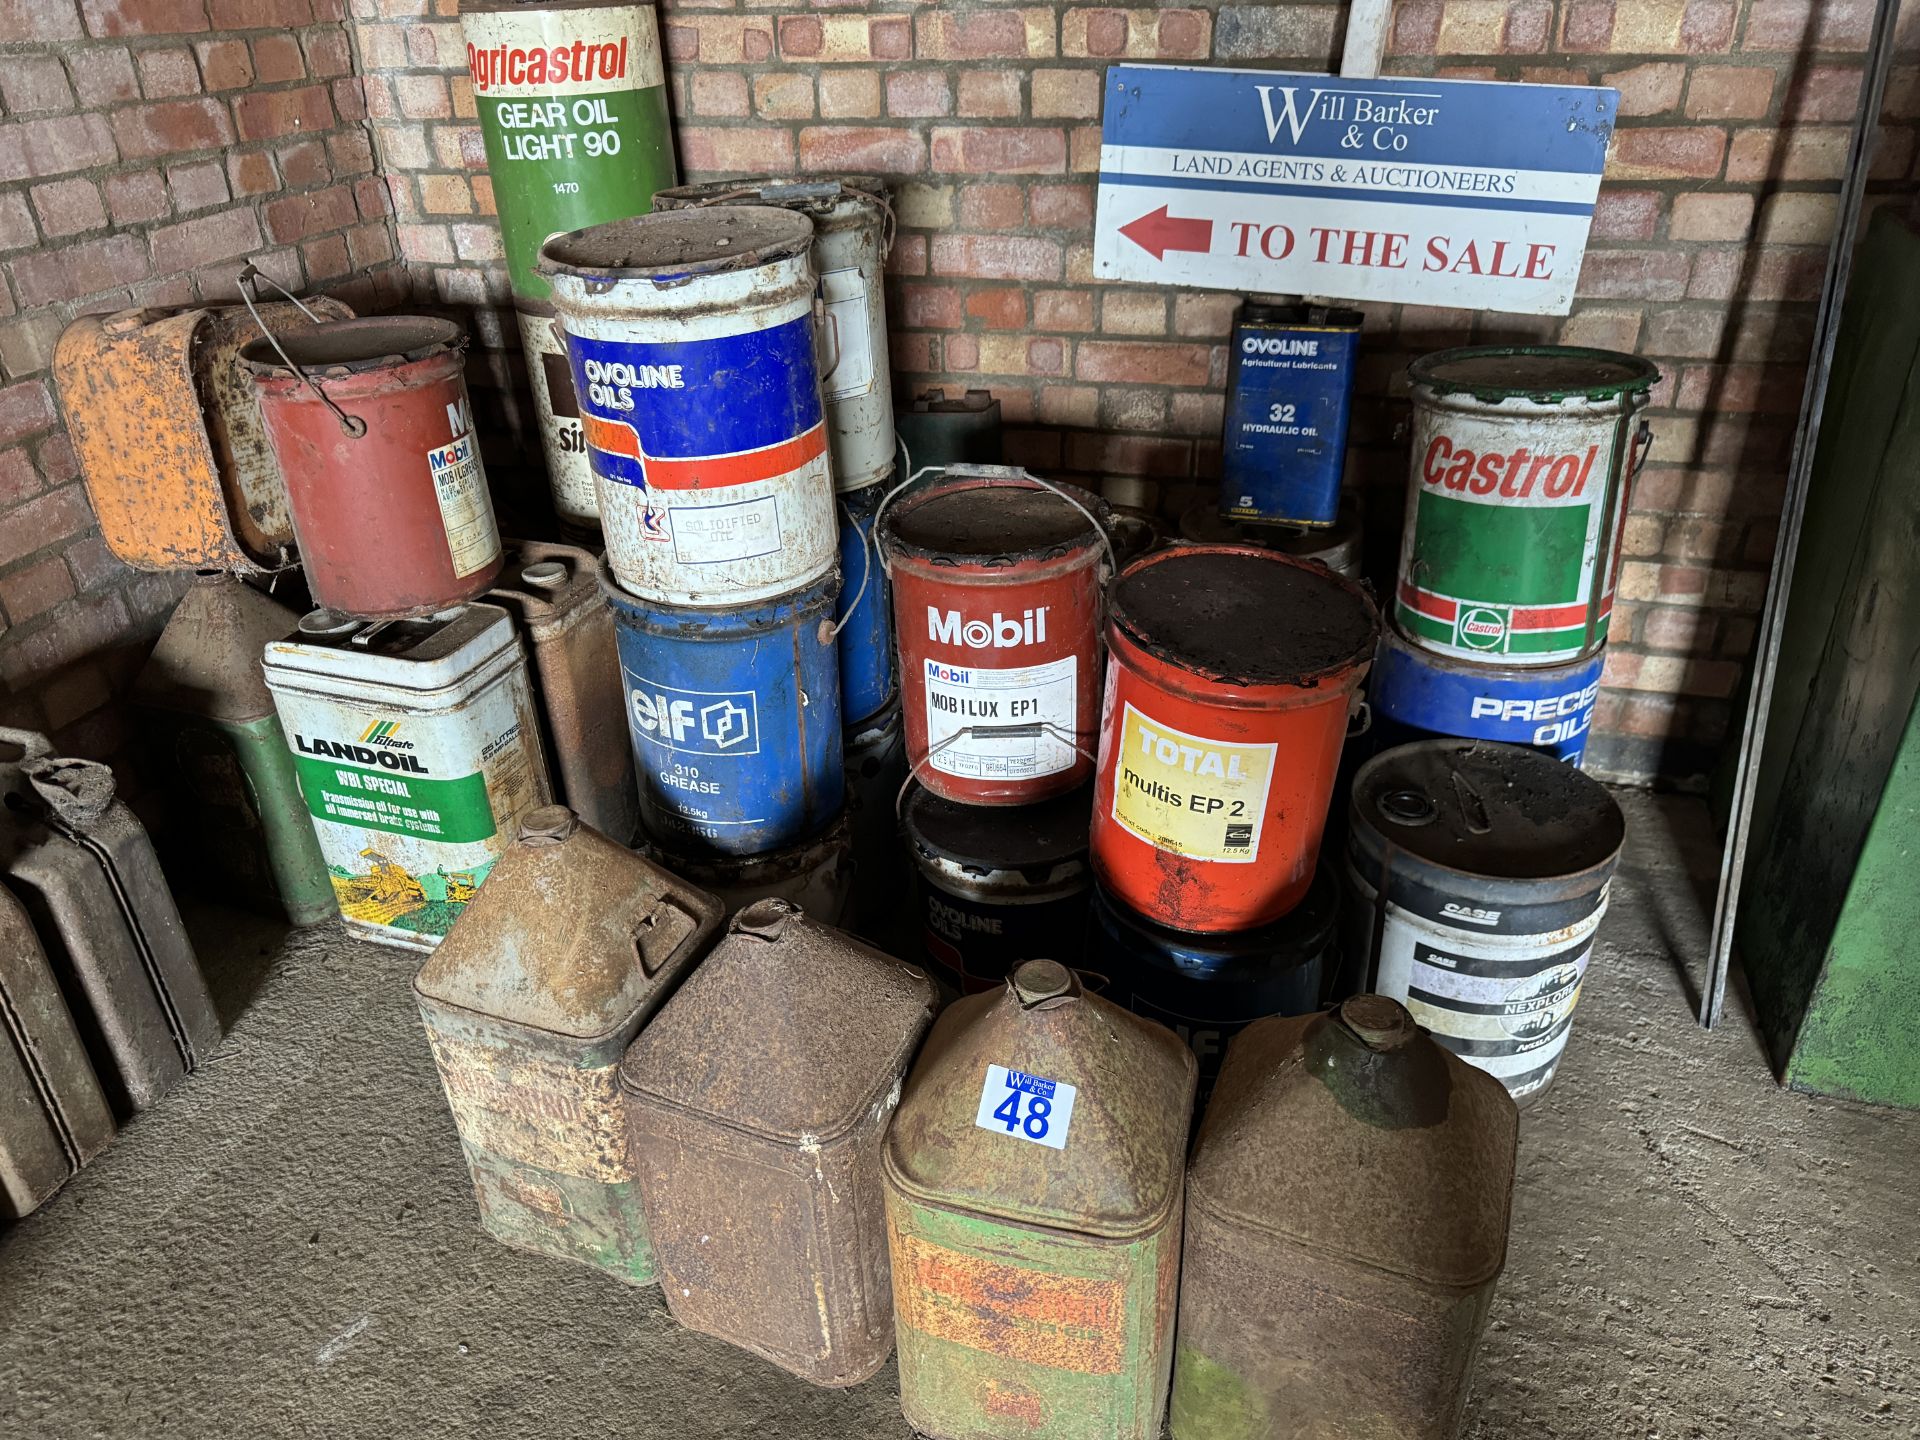 Castrol 5 gallon tins & qty of others